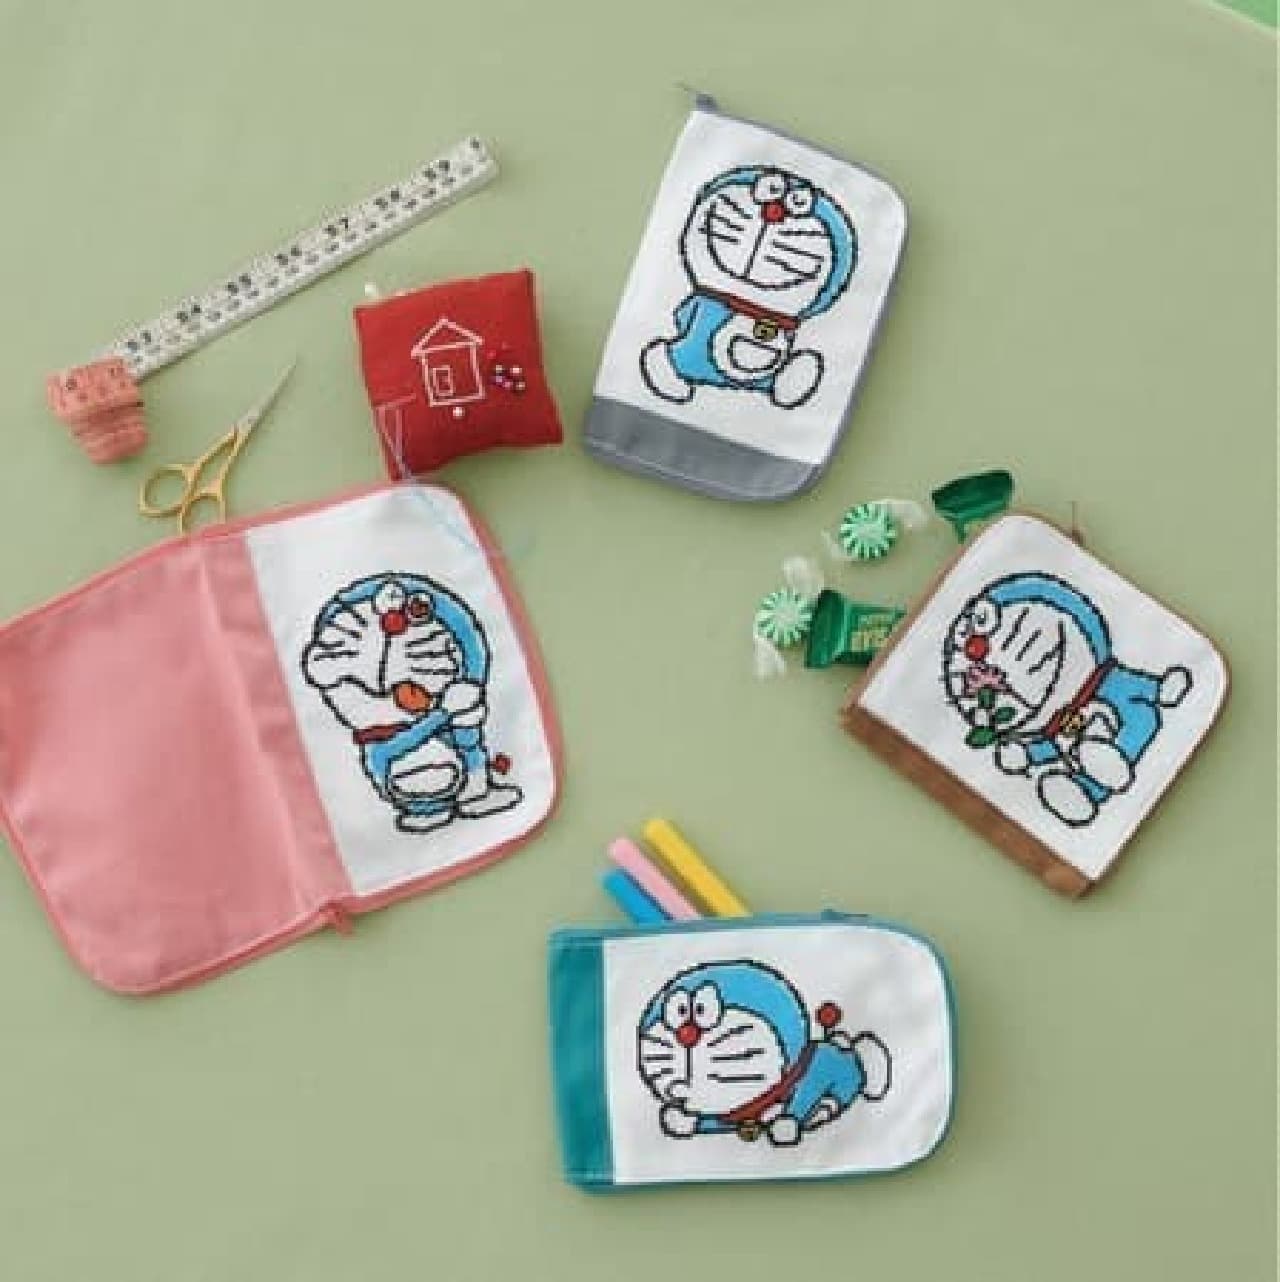 Doraemon's pajamas and socks from Felissimo --A design that is easy for adults to use and makes you laugh